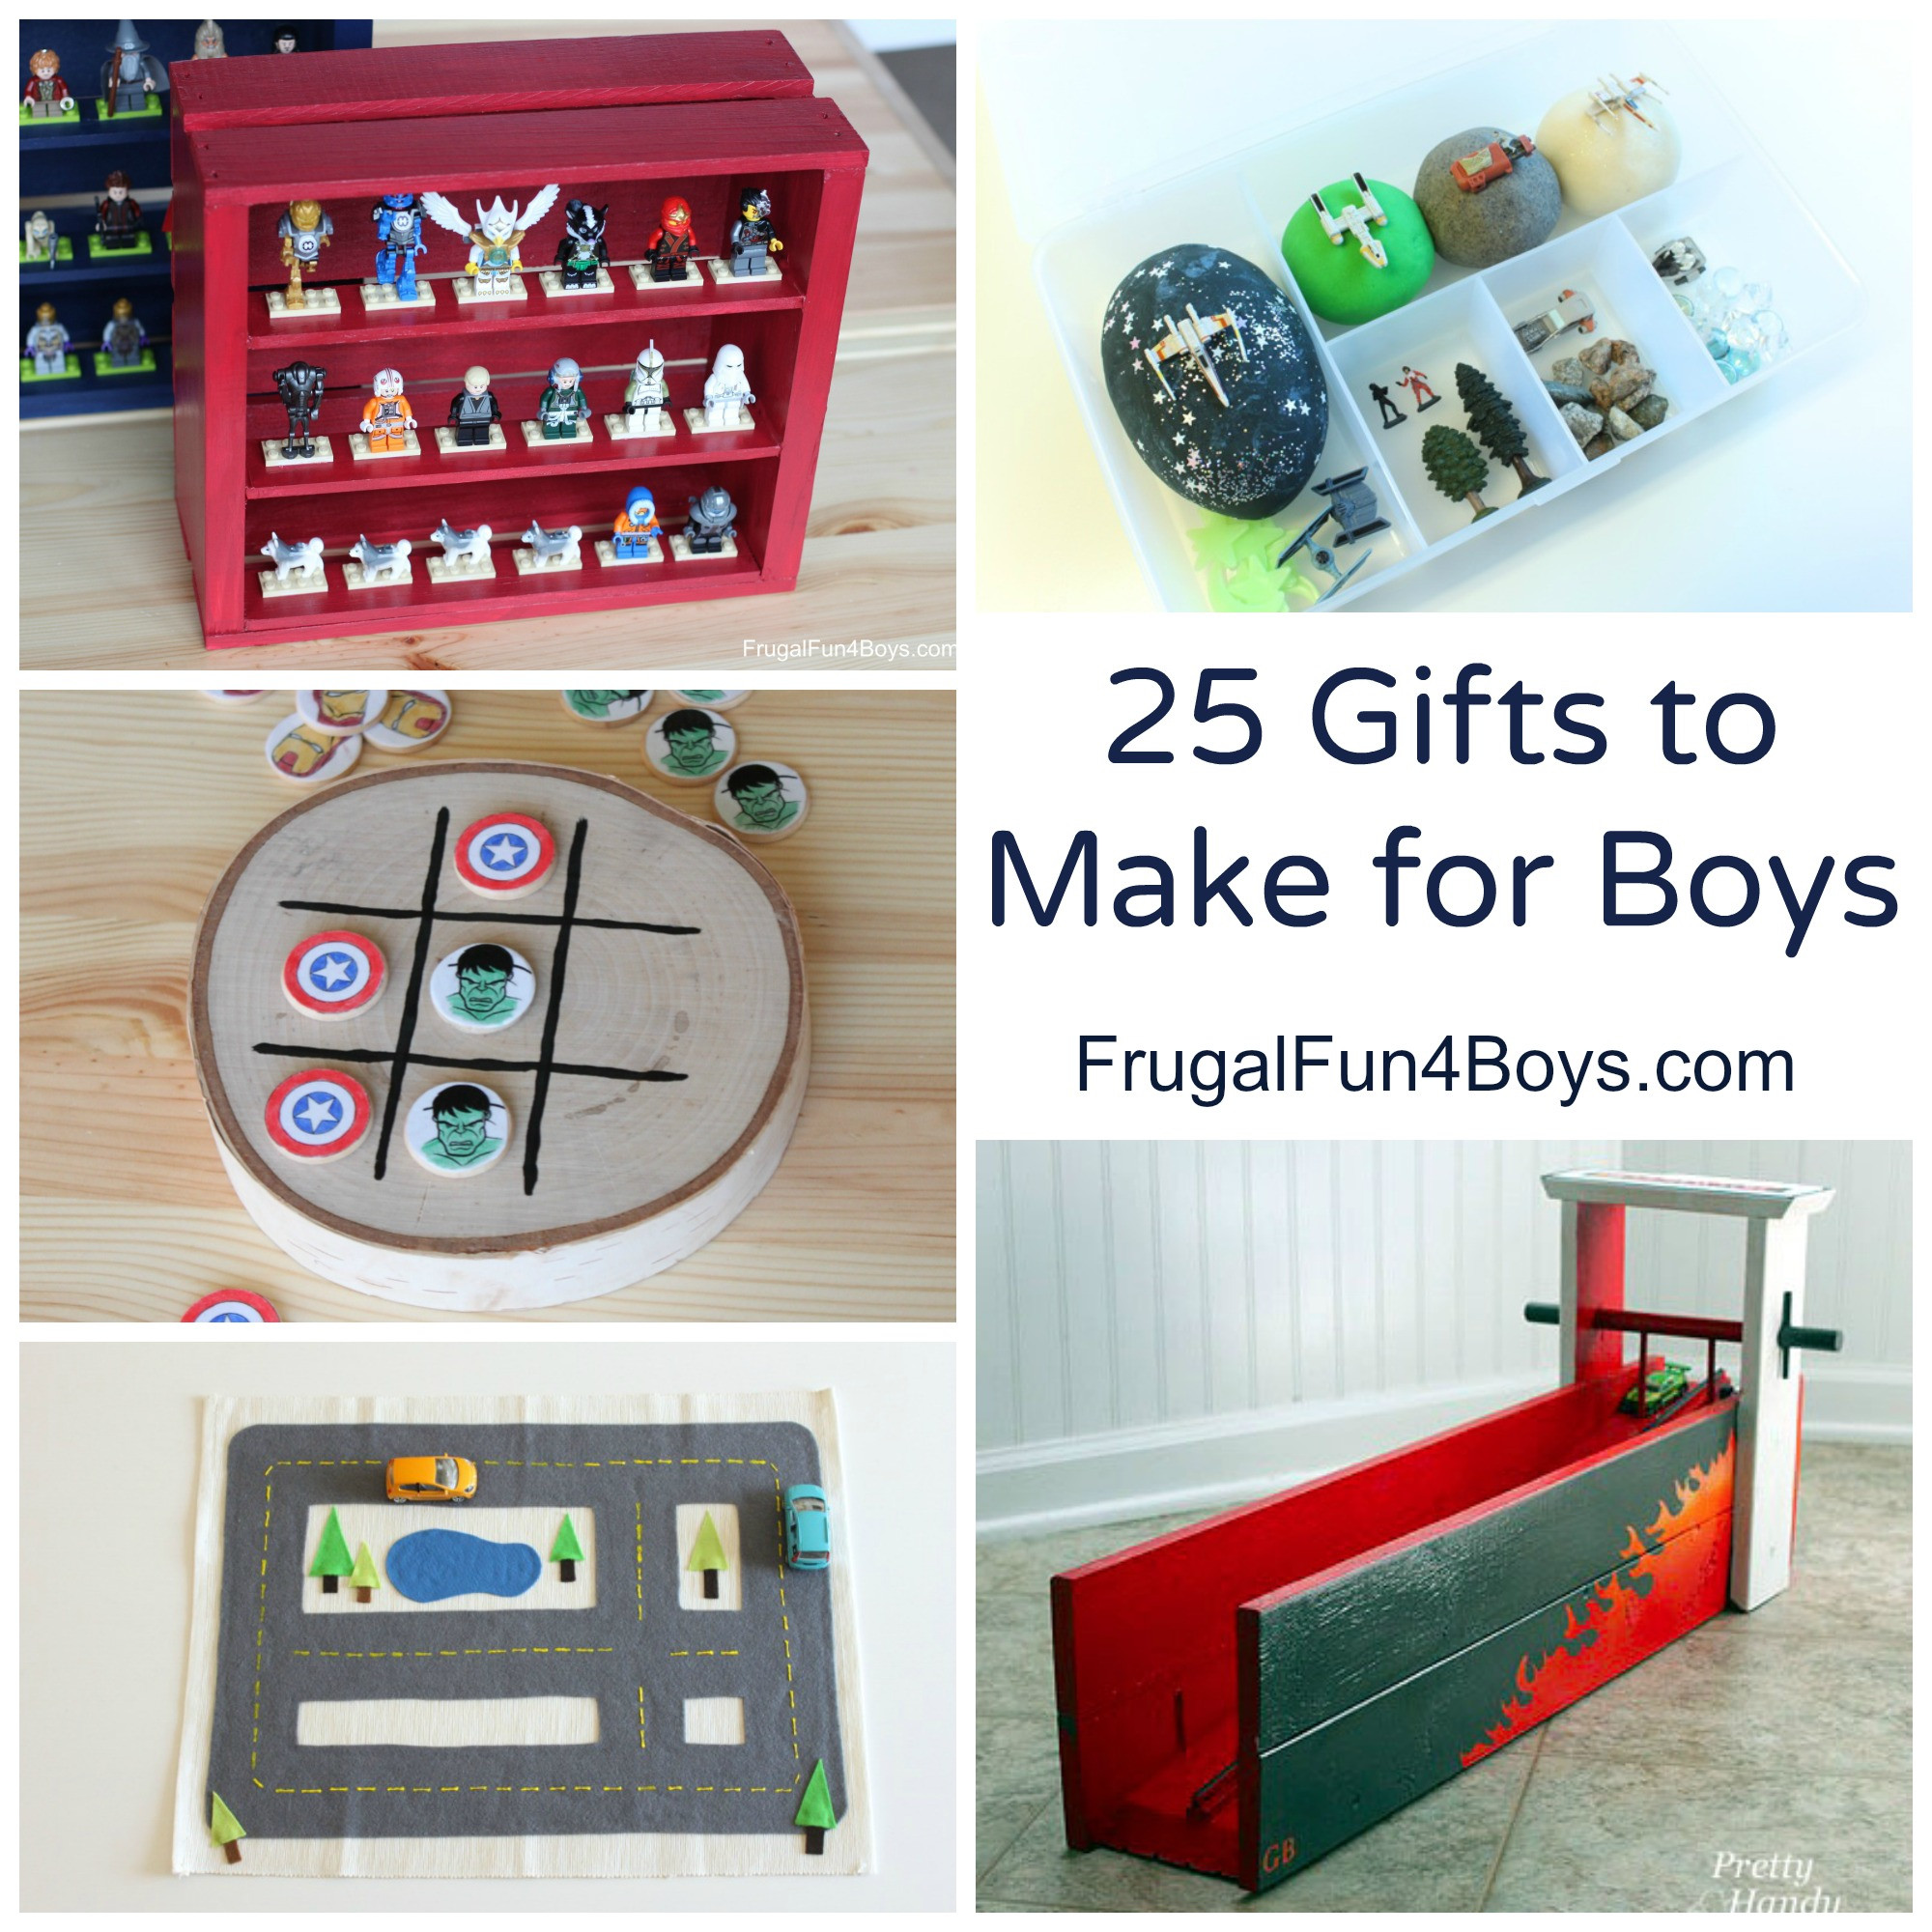 Diy Gift Ideas For Boys
 25 More Homemade Gifts to Make for Boys Frugal Fun For